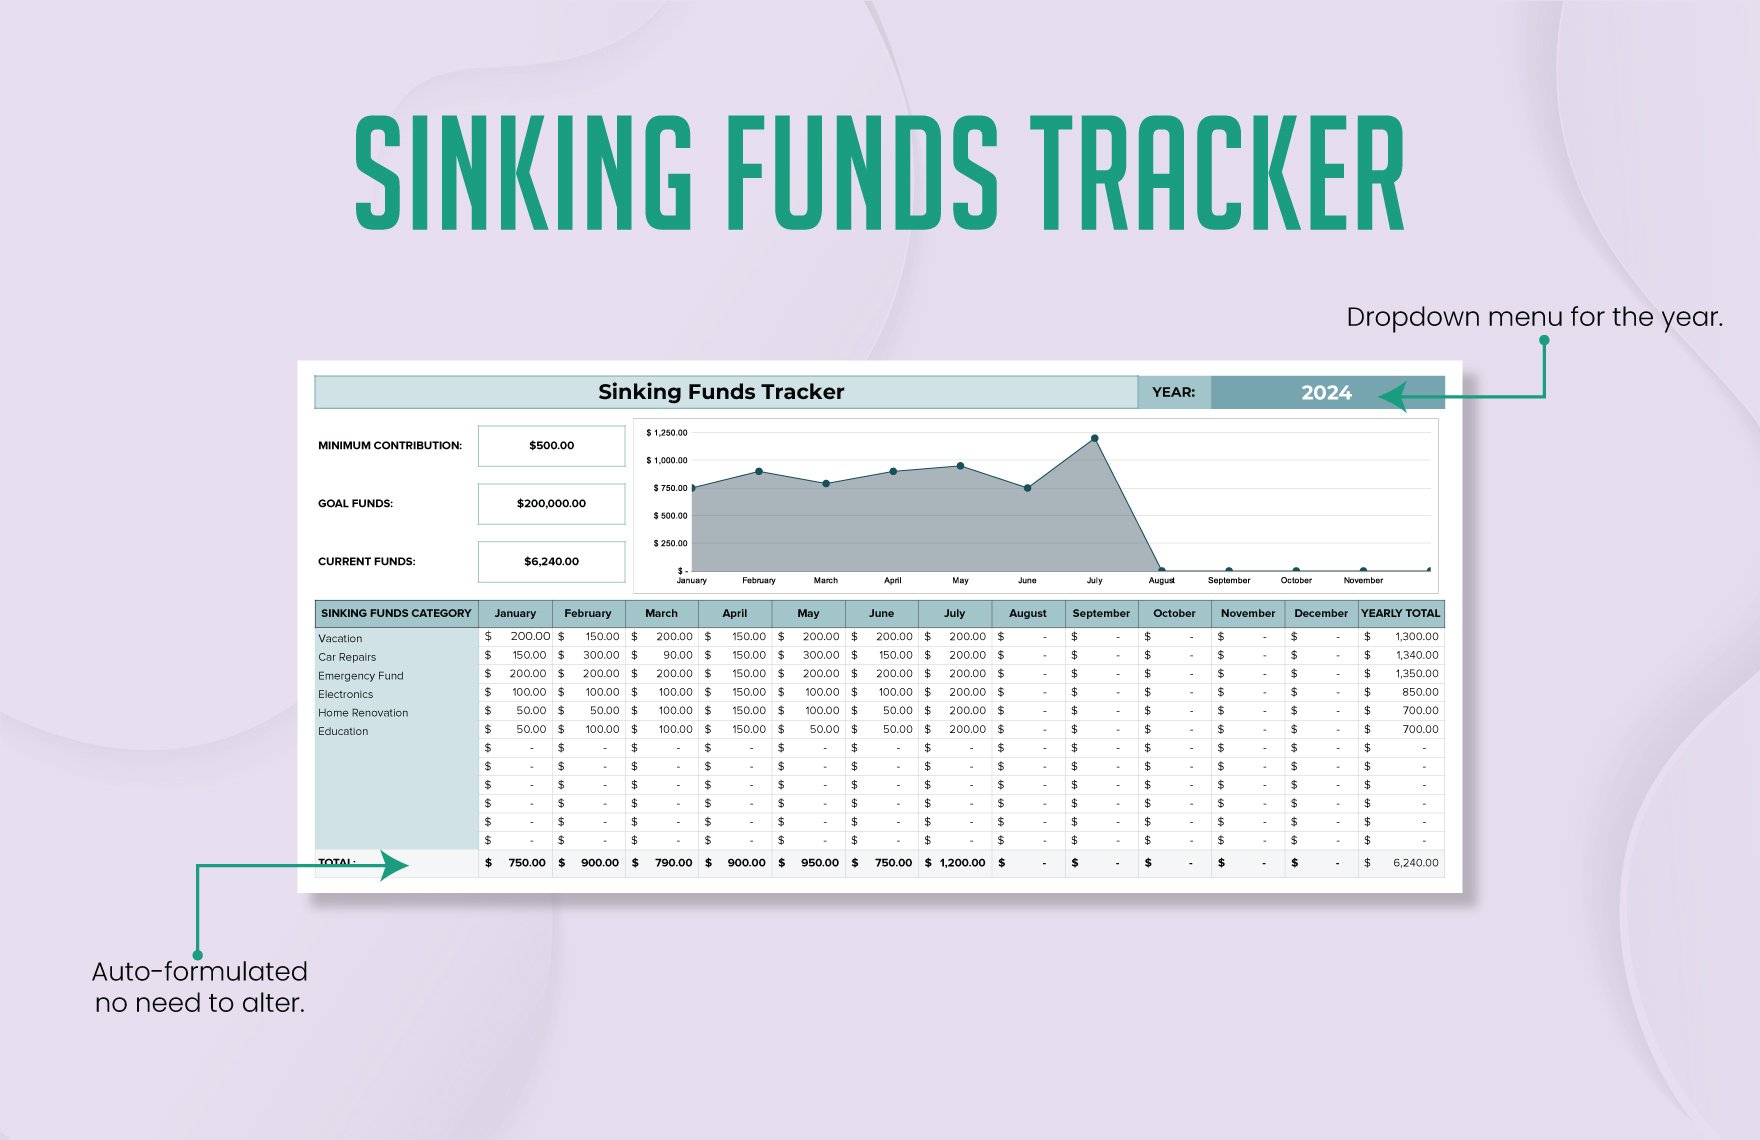 Sinking Funds Tracker Template